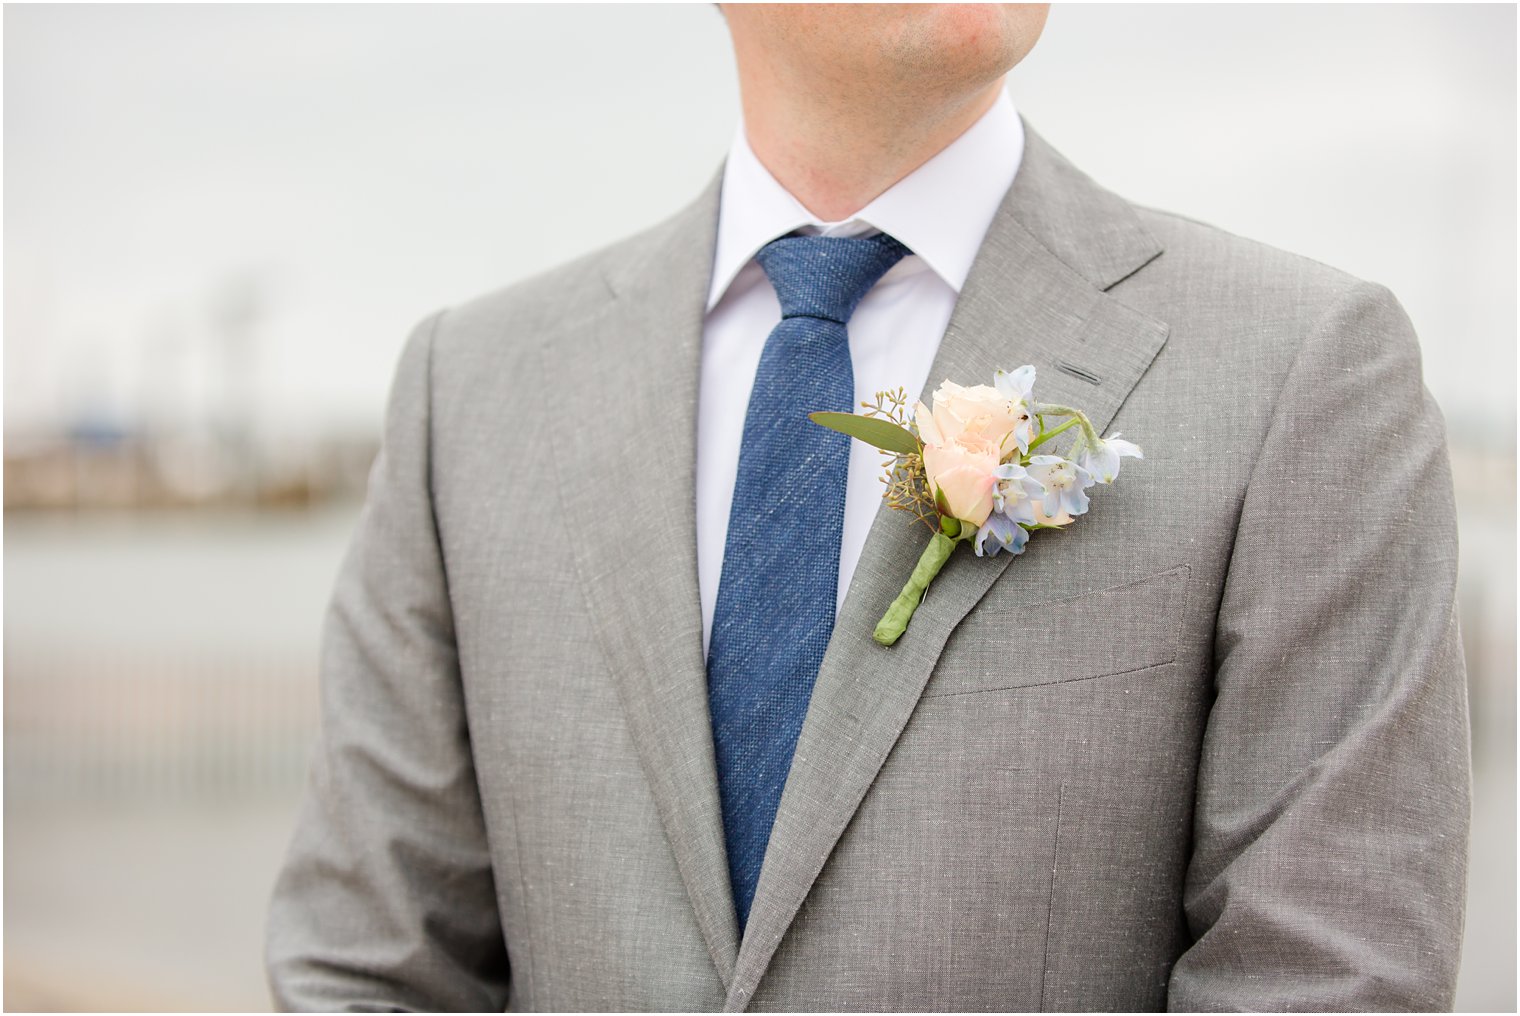 Grey suit from Suitsupply photographed by Idalia Photography